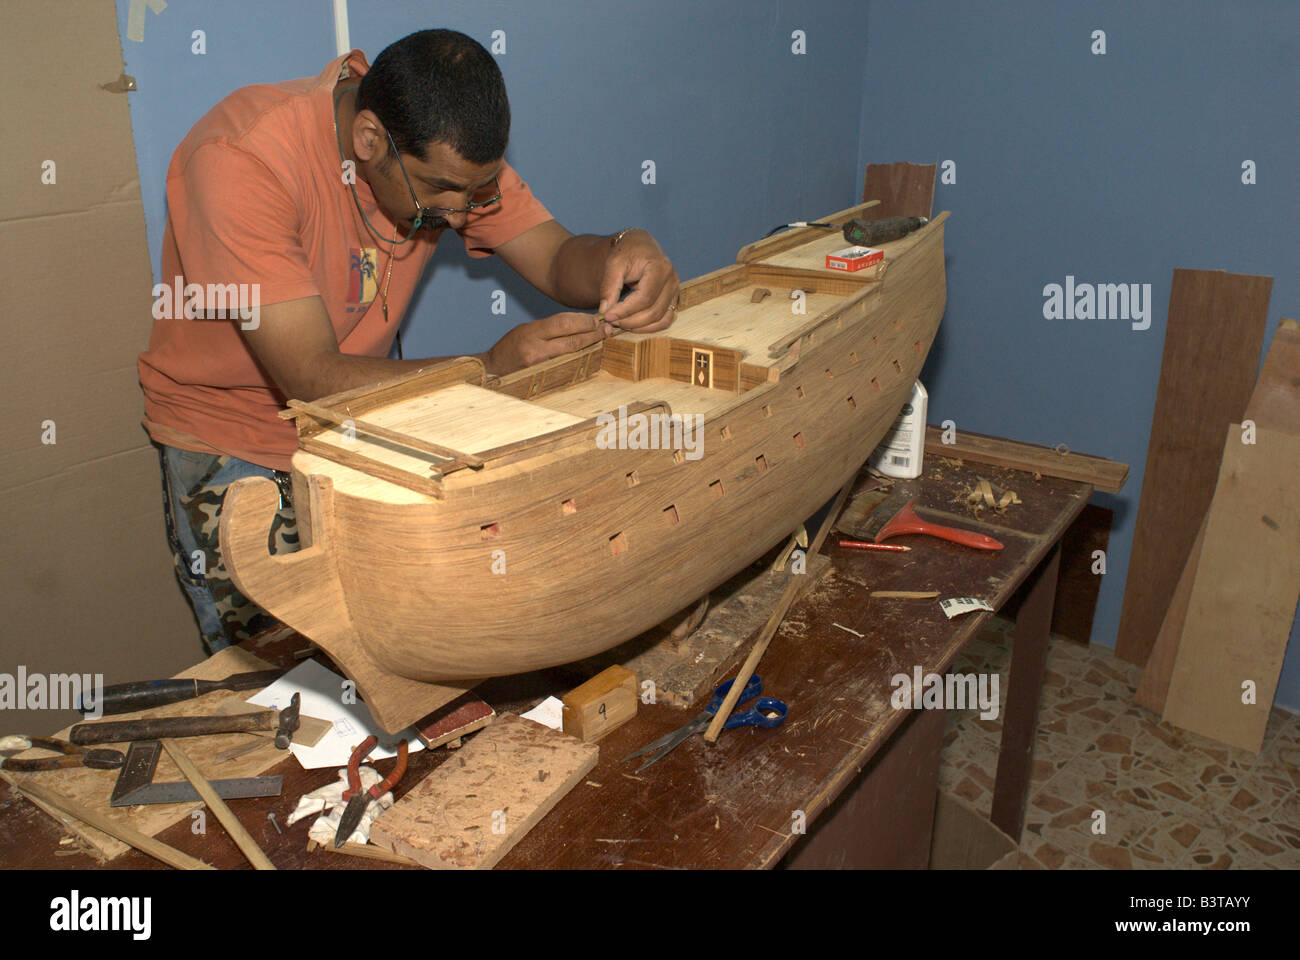 mauritius, curepipe. worker at the comajora model ship